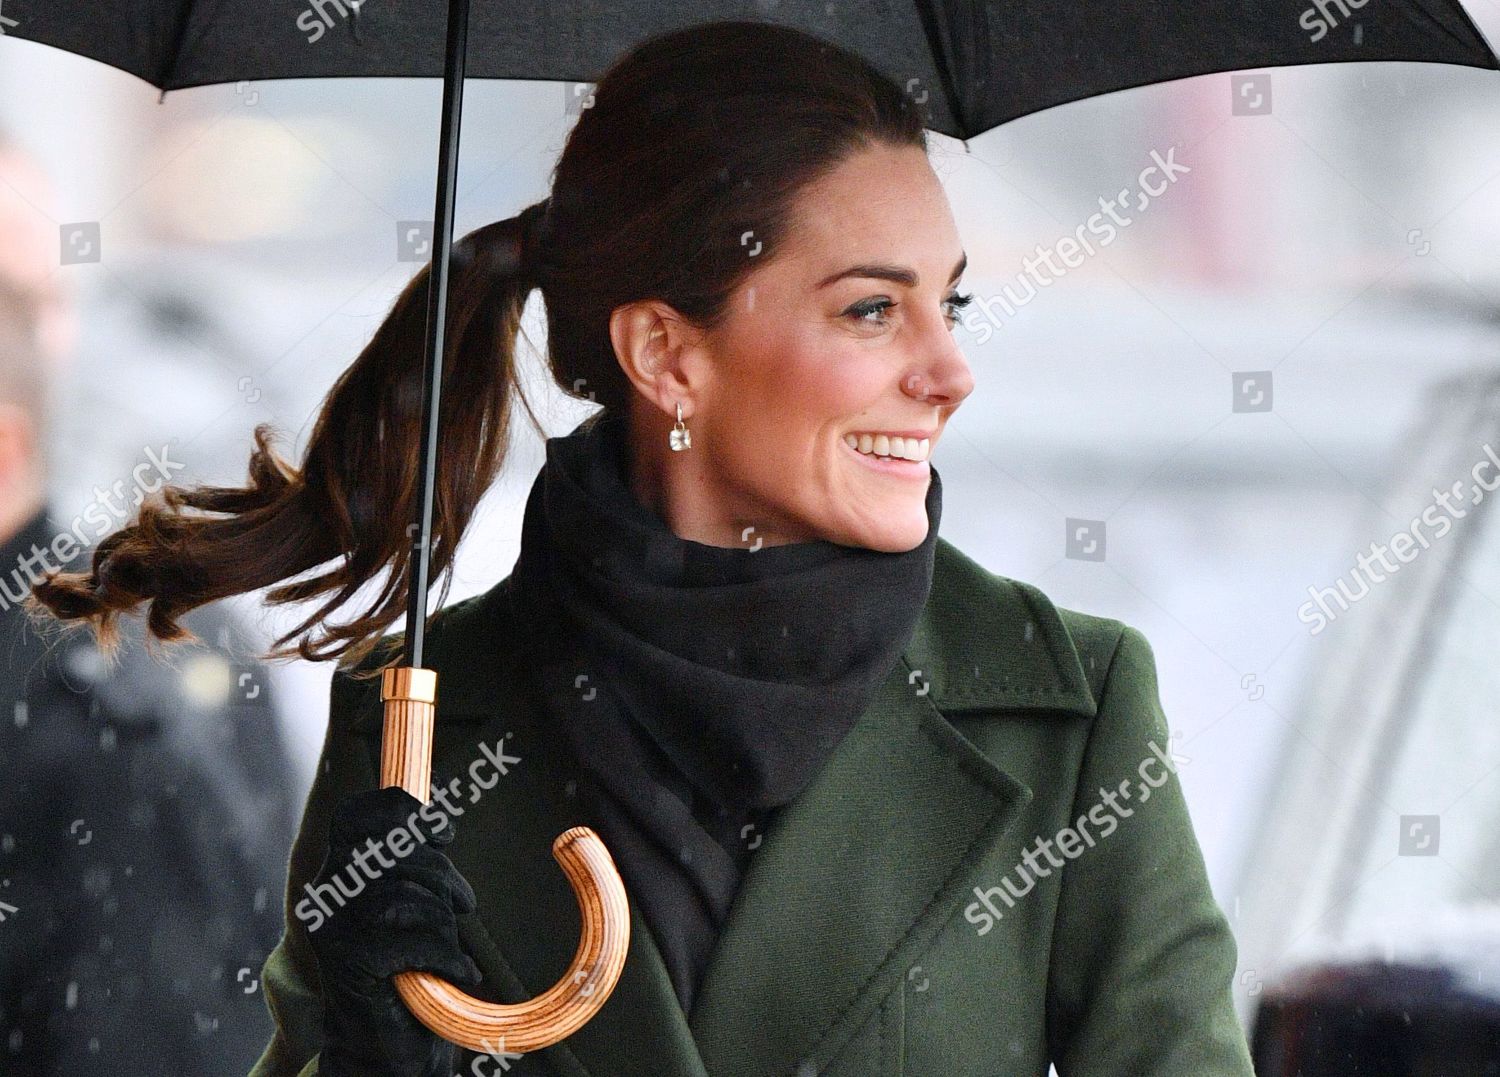 prince-william-and-catherine-duchess-of-cambridge-visit-to-blackpool-uk-shutterstock-editorial-10143623n.jpg